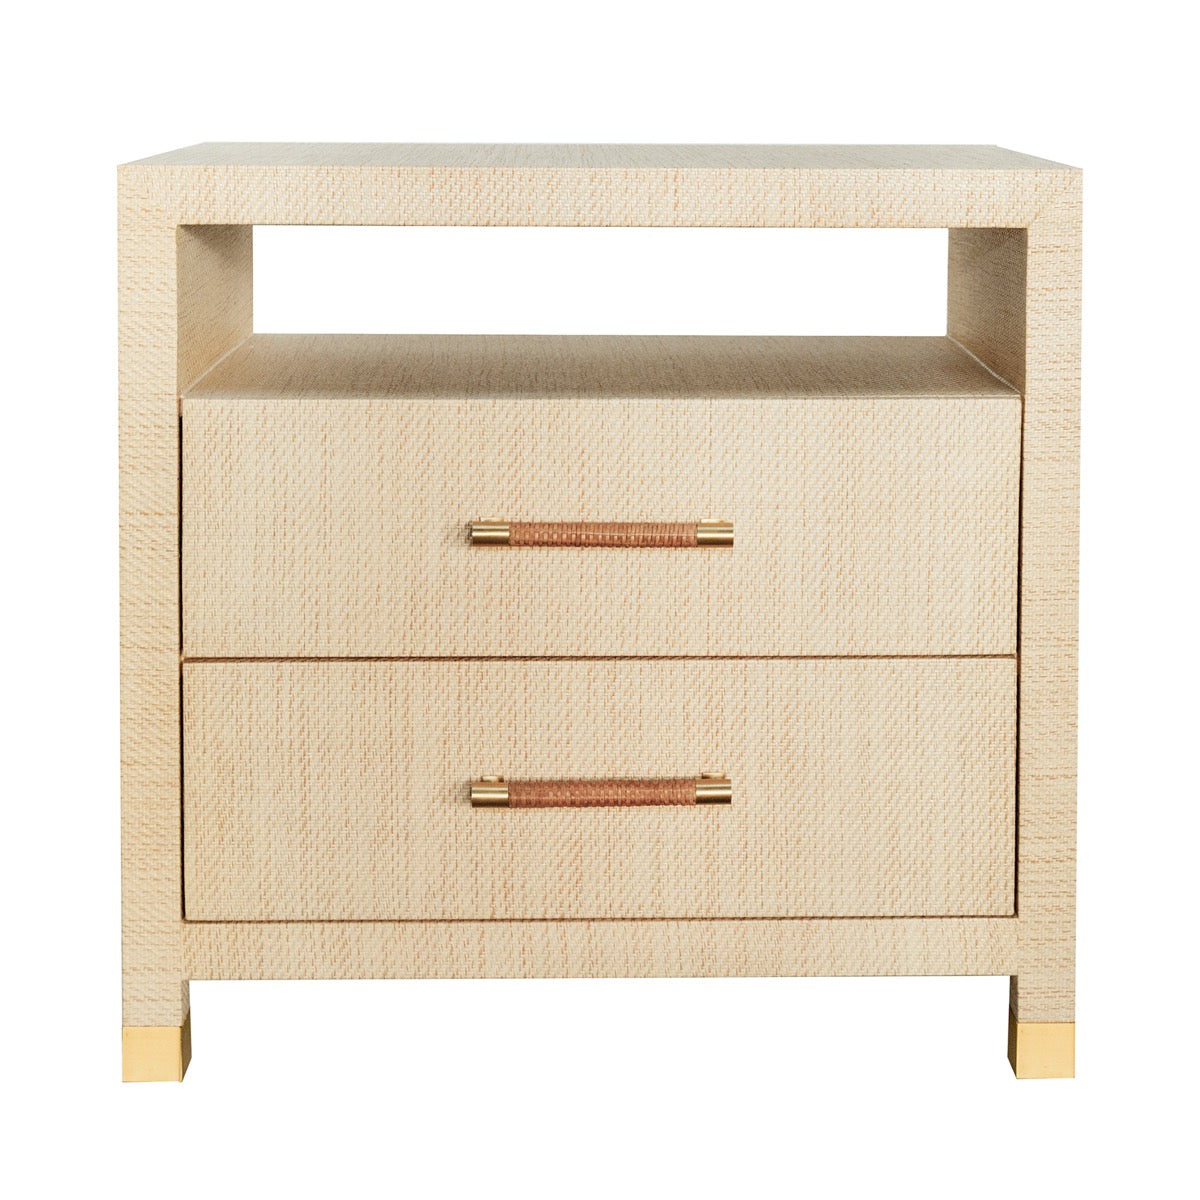 Charleston Side Table - 2 Drawer Natural Grasscloth. Front view.